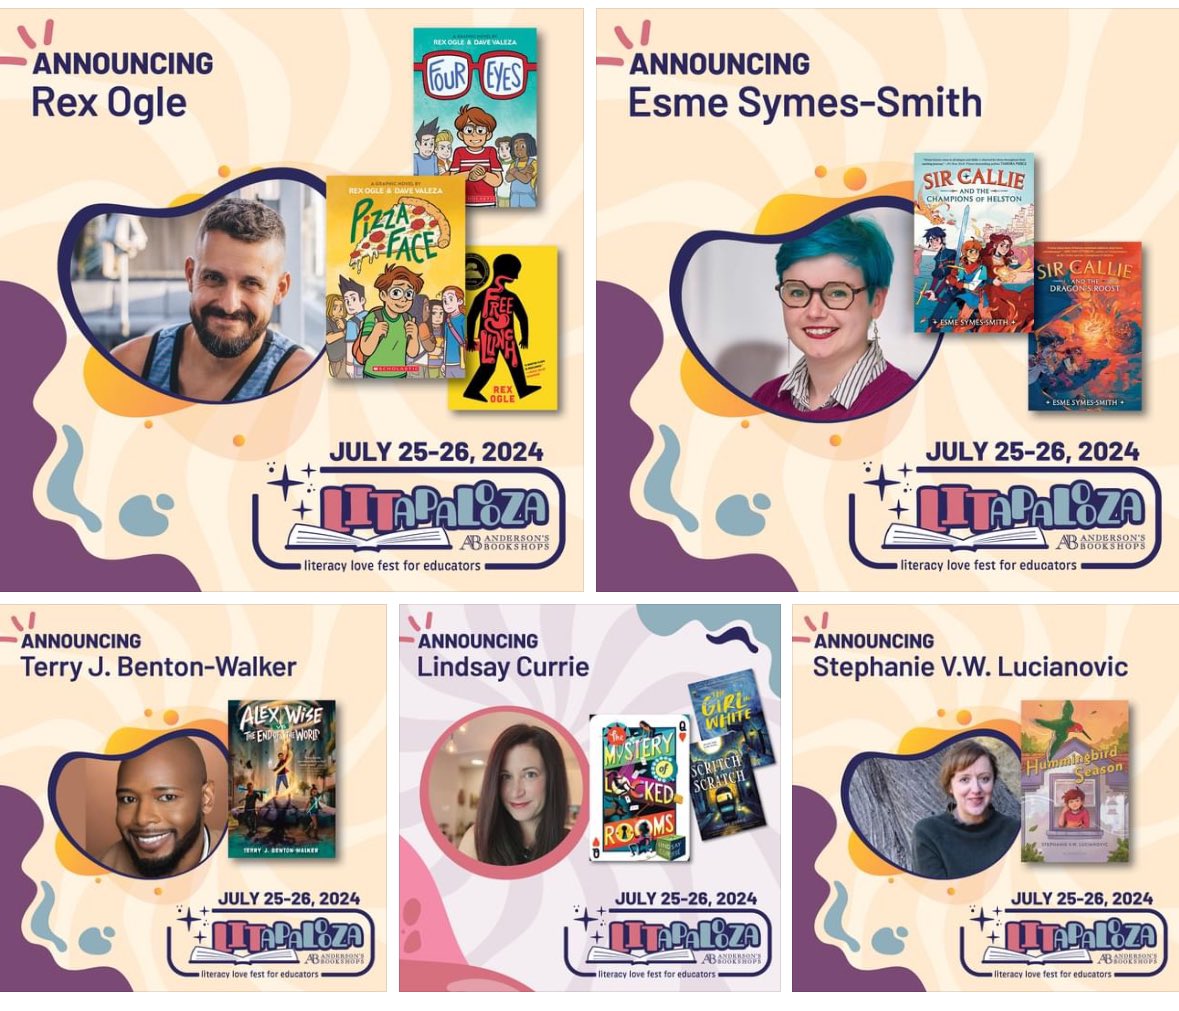 Happy #LITfriday everyone! We have more author announcements to help finish up the week! @RexOgle @EsmeSymesSmith @tjbentonwalker @lindsayncurrie & @grubreport will be among the 70+ authors/illustrators appearing at #LITapalooza this summer! Register Here: LITapalooza2024.eventcombo.com